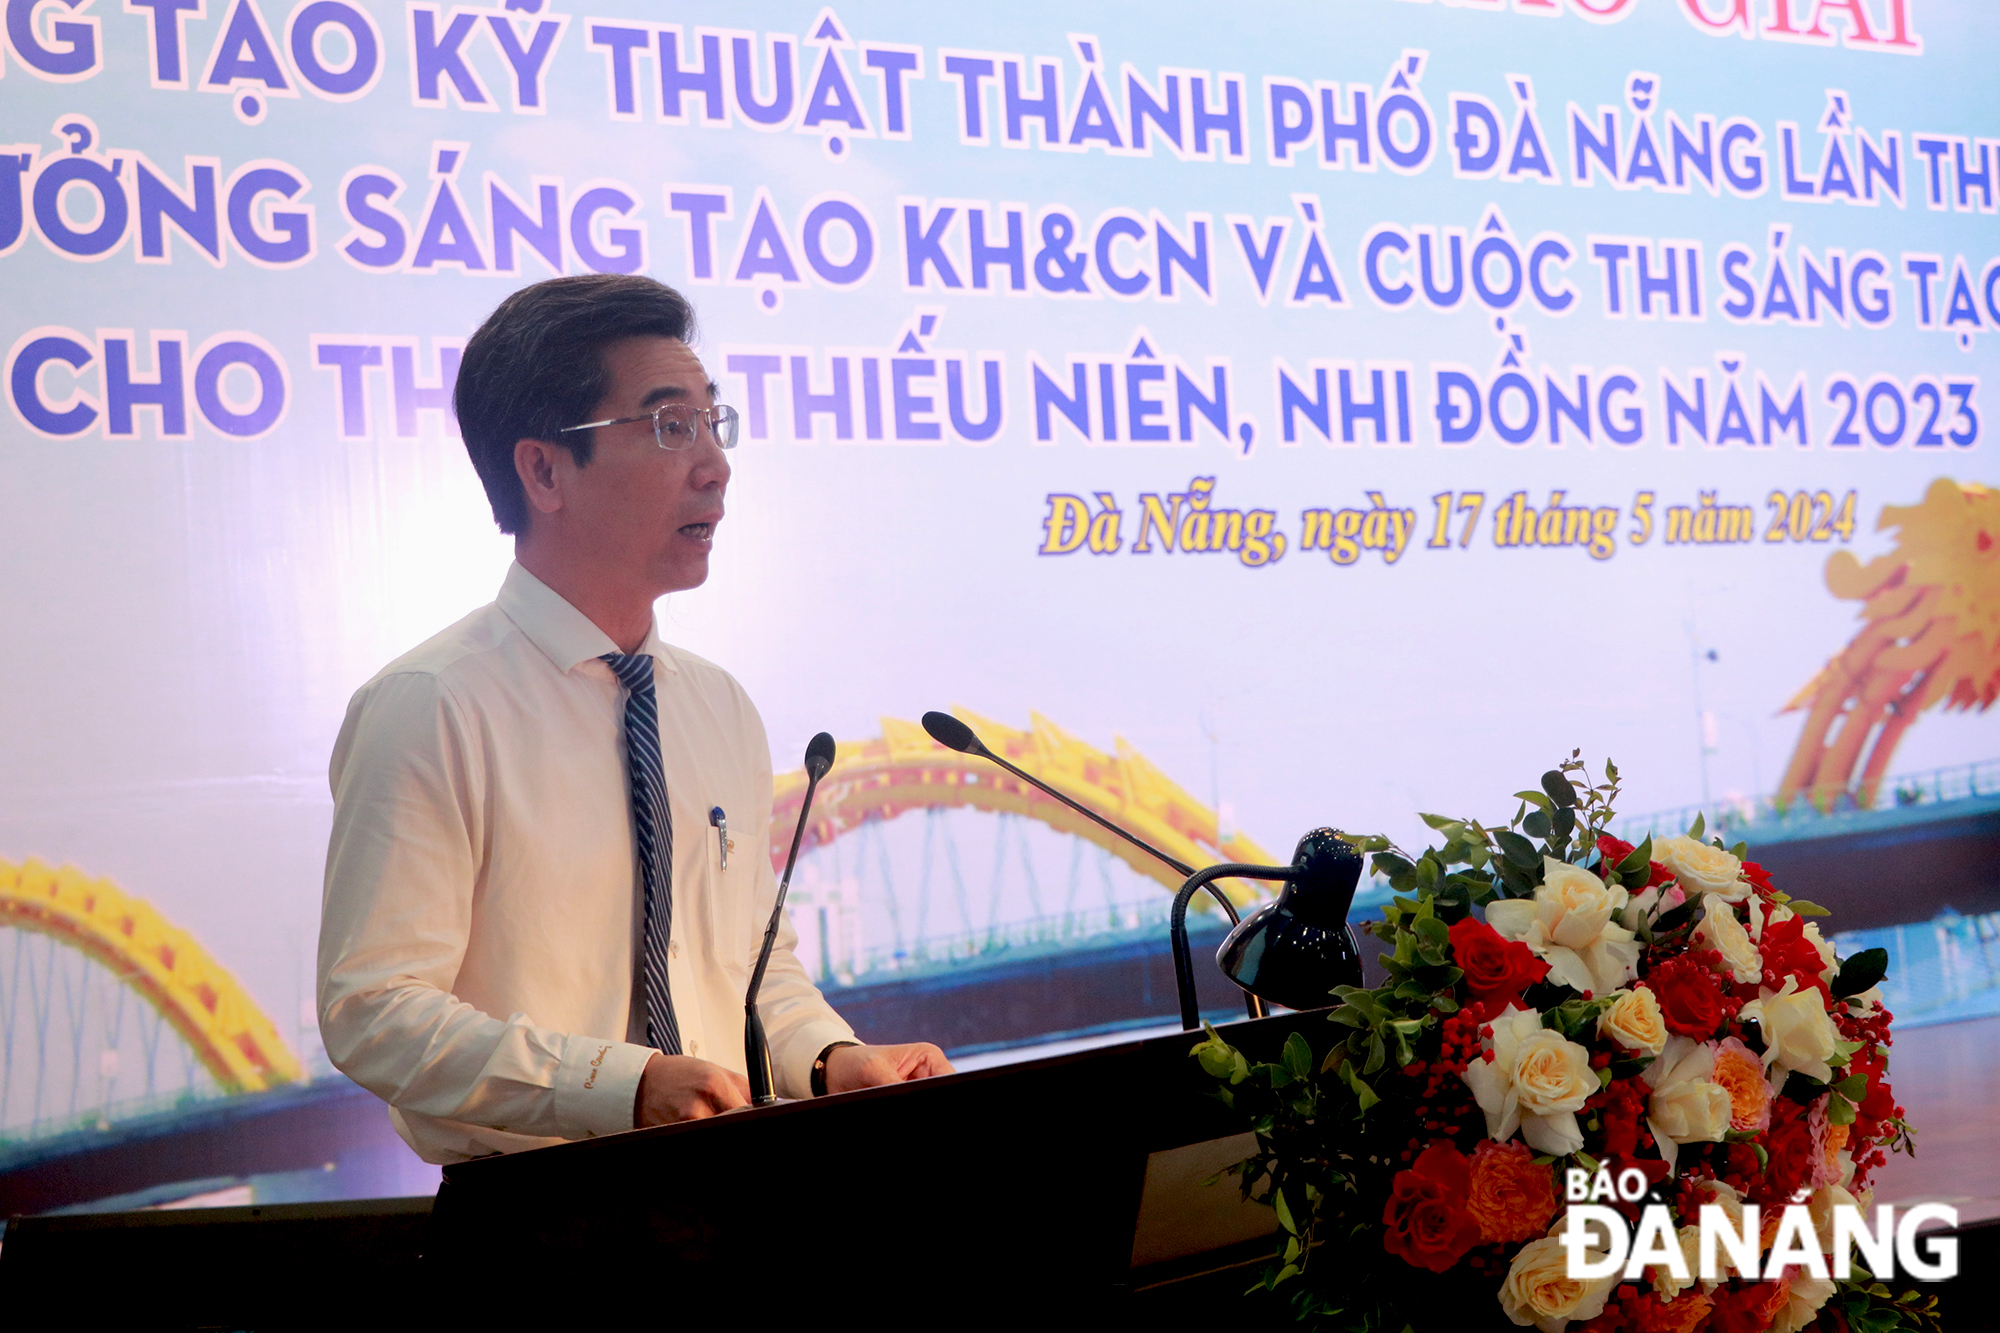 Vice Chairman of the municipal People's Committee Tran Chi Cuong